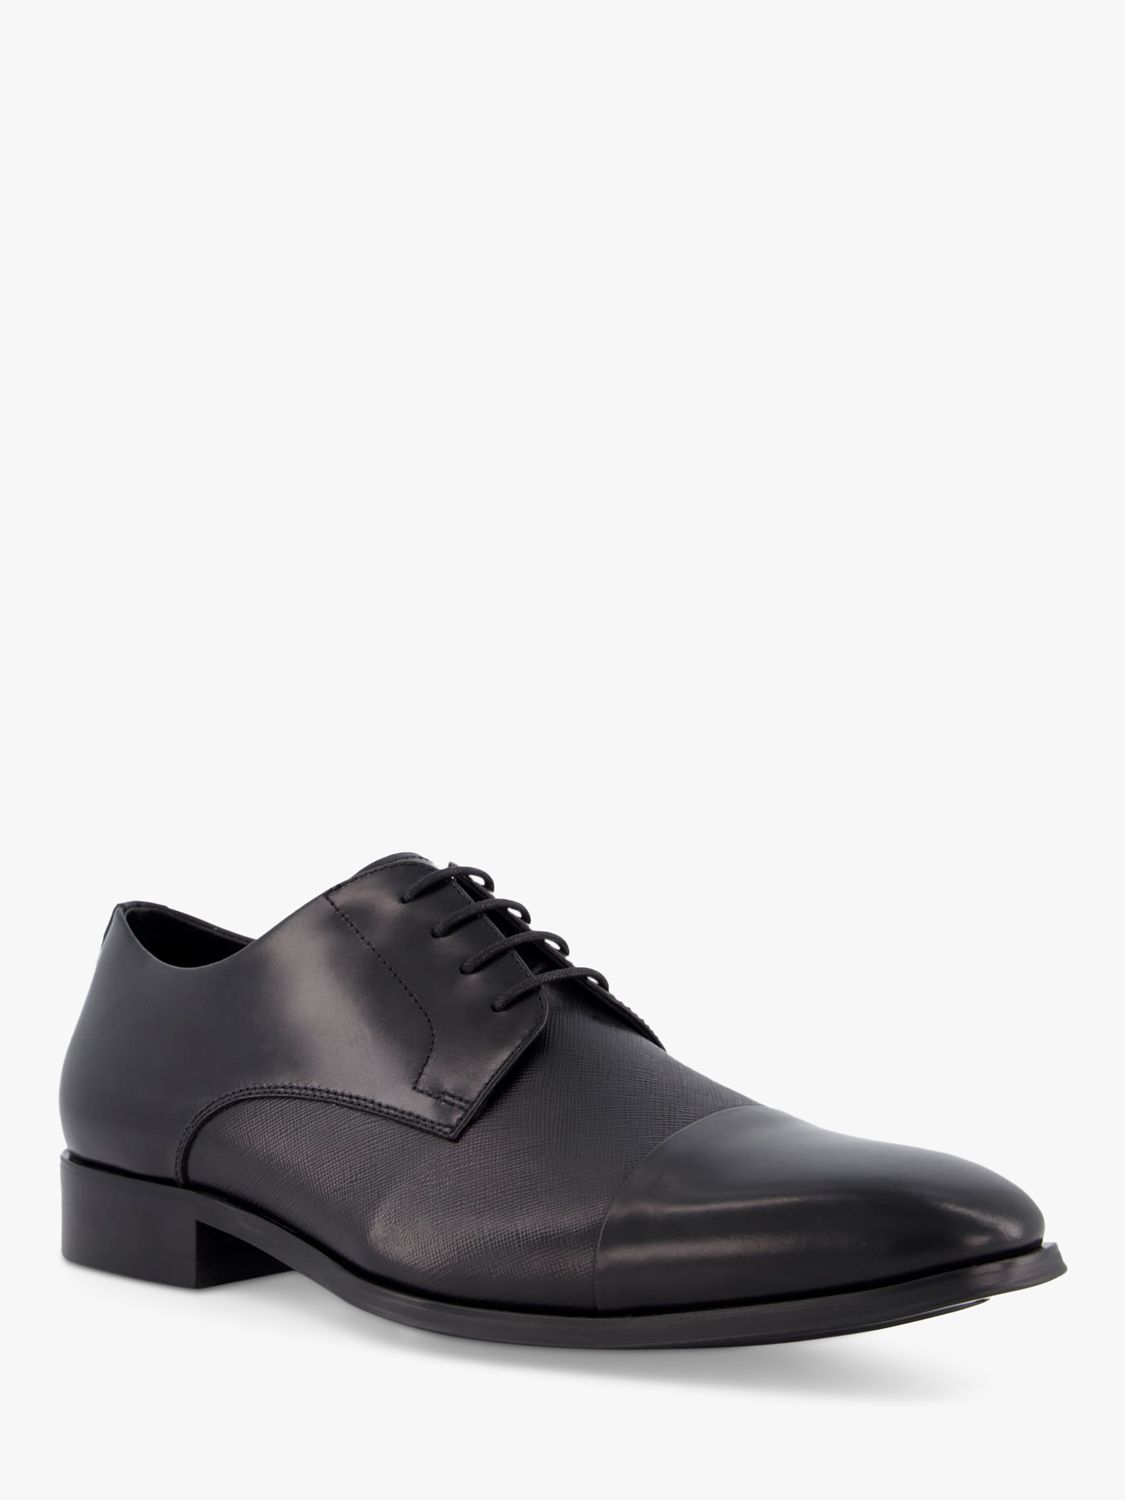 Dune Sheet Leather Lace Up Shoes, Black at John Lewis & Partners